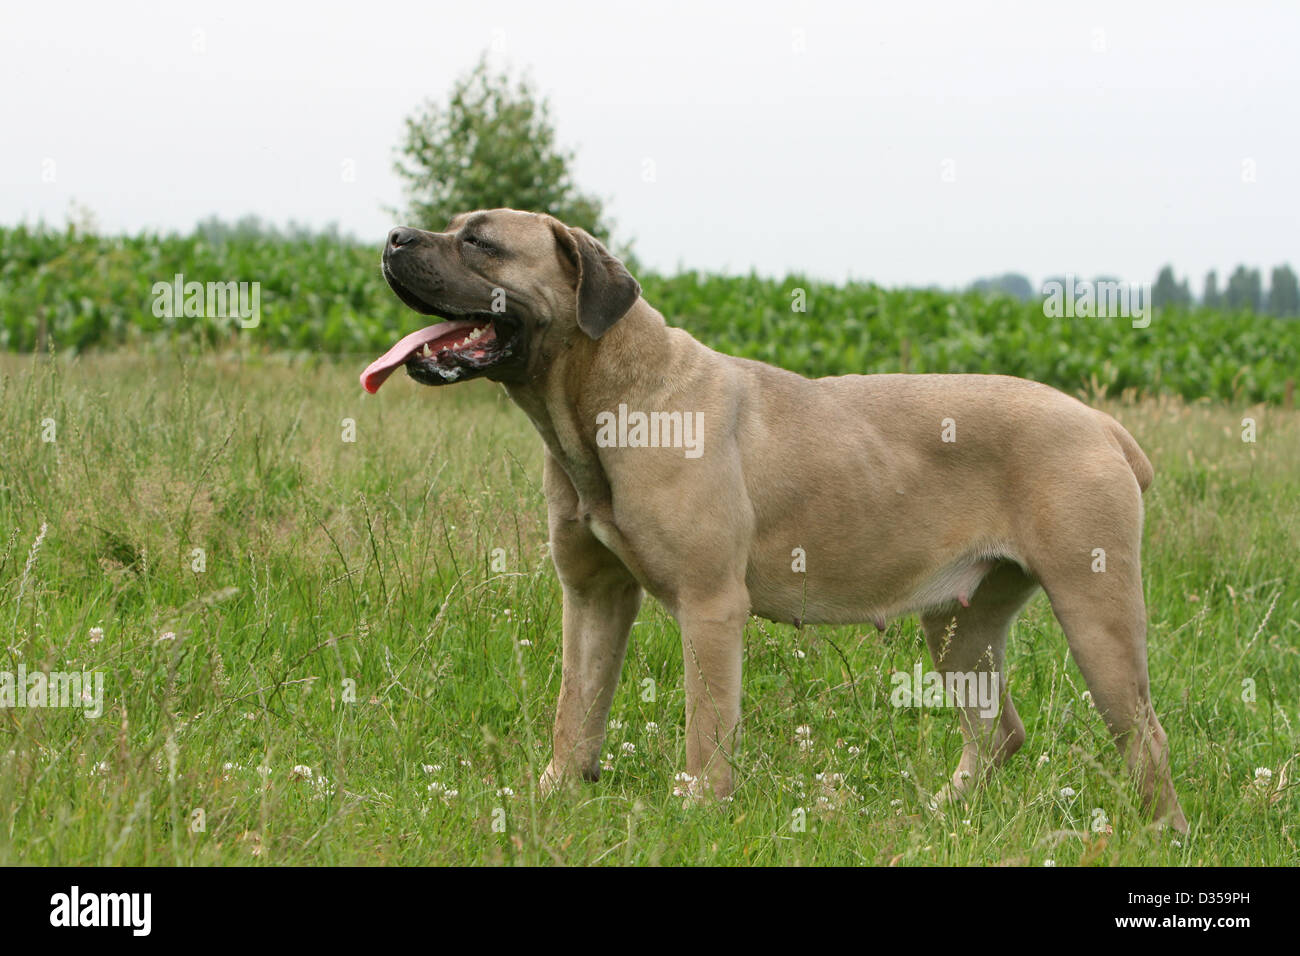 Dog Cane Corso Italian Molosser Adult Standing In A Meadow